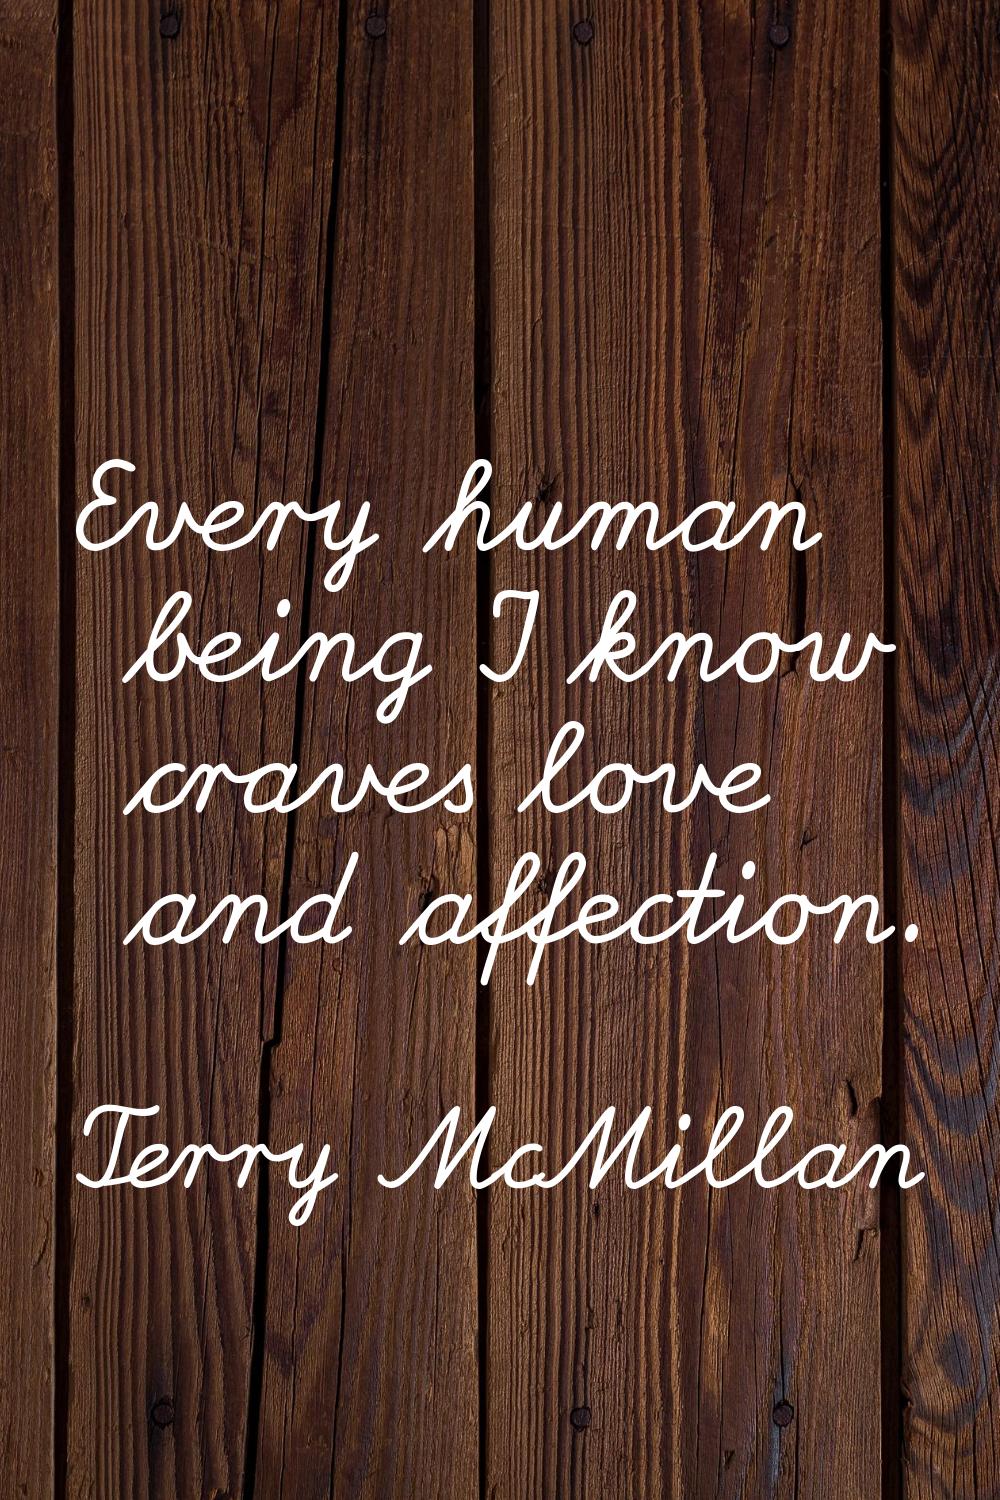 Every human being I know craves love and affection.